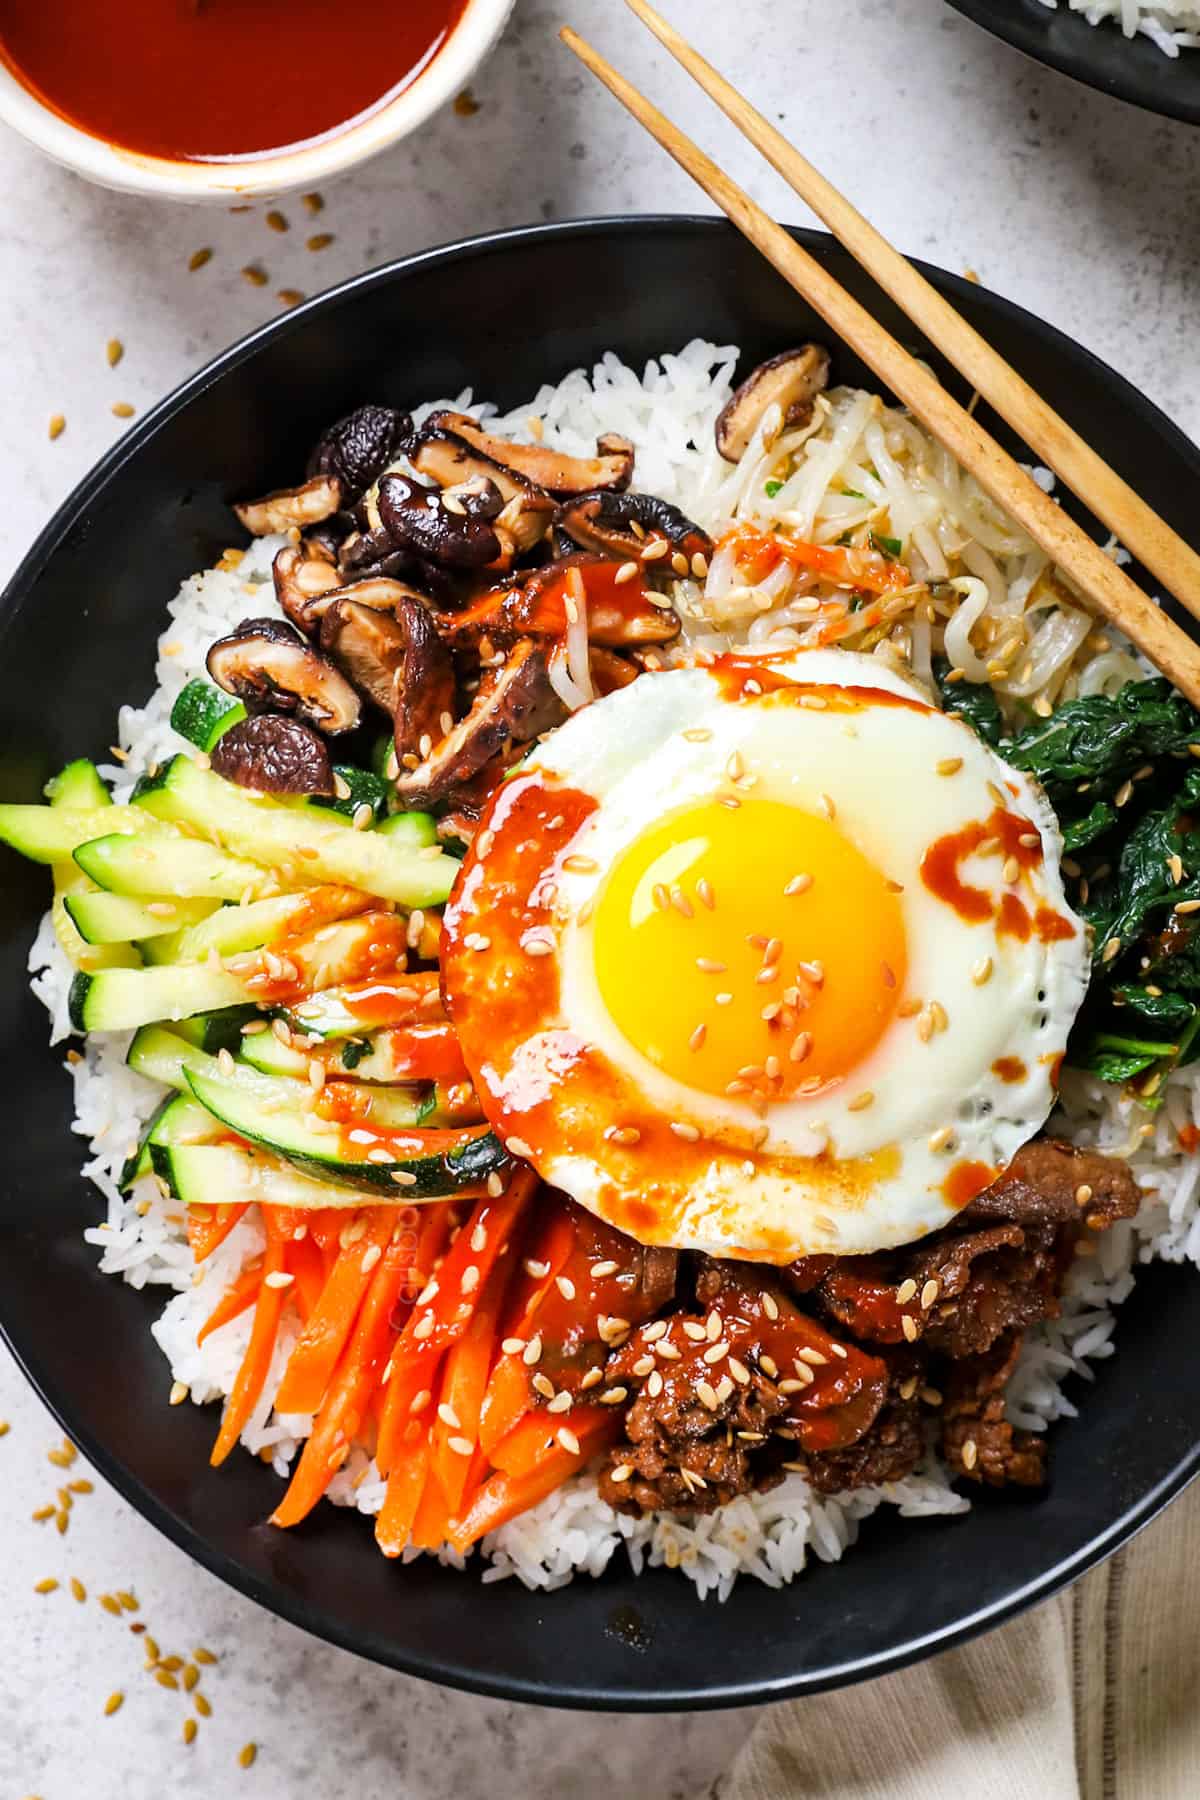 top view of bibimbap showing how to assemble the bowls with rice, vegetables and beef